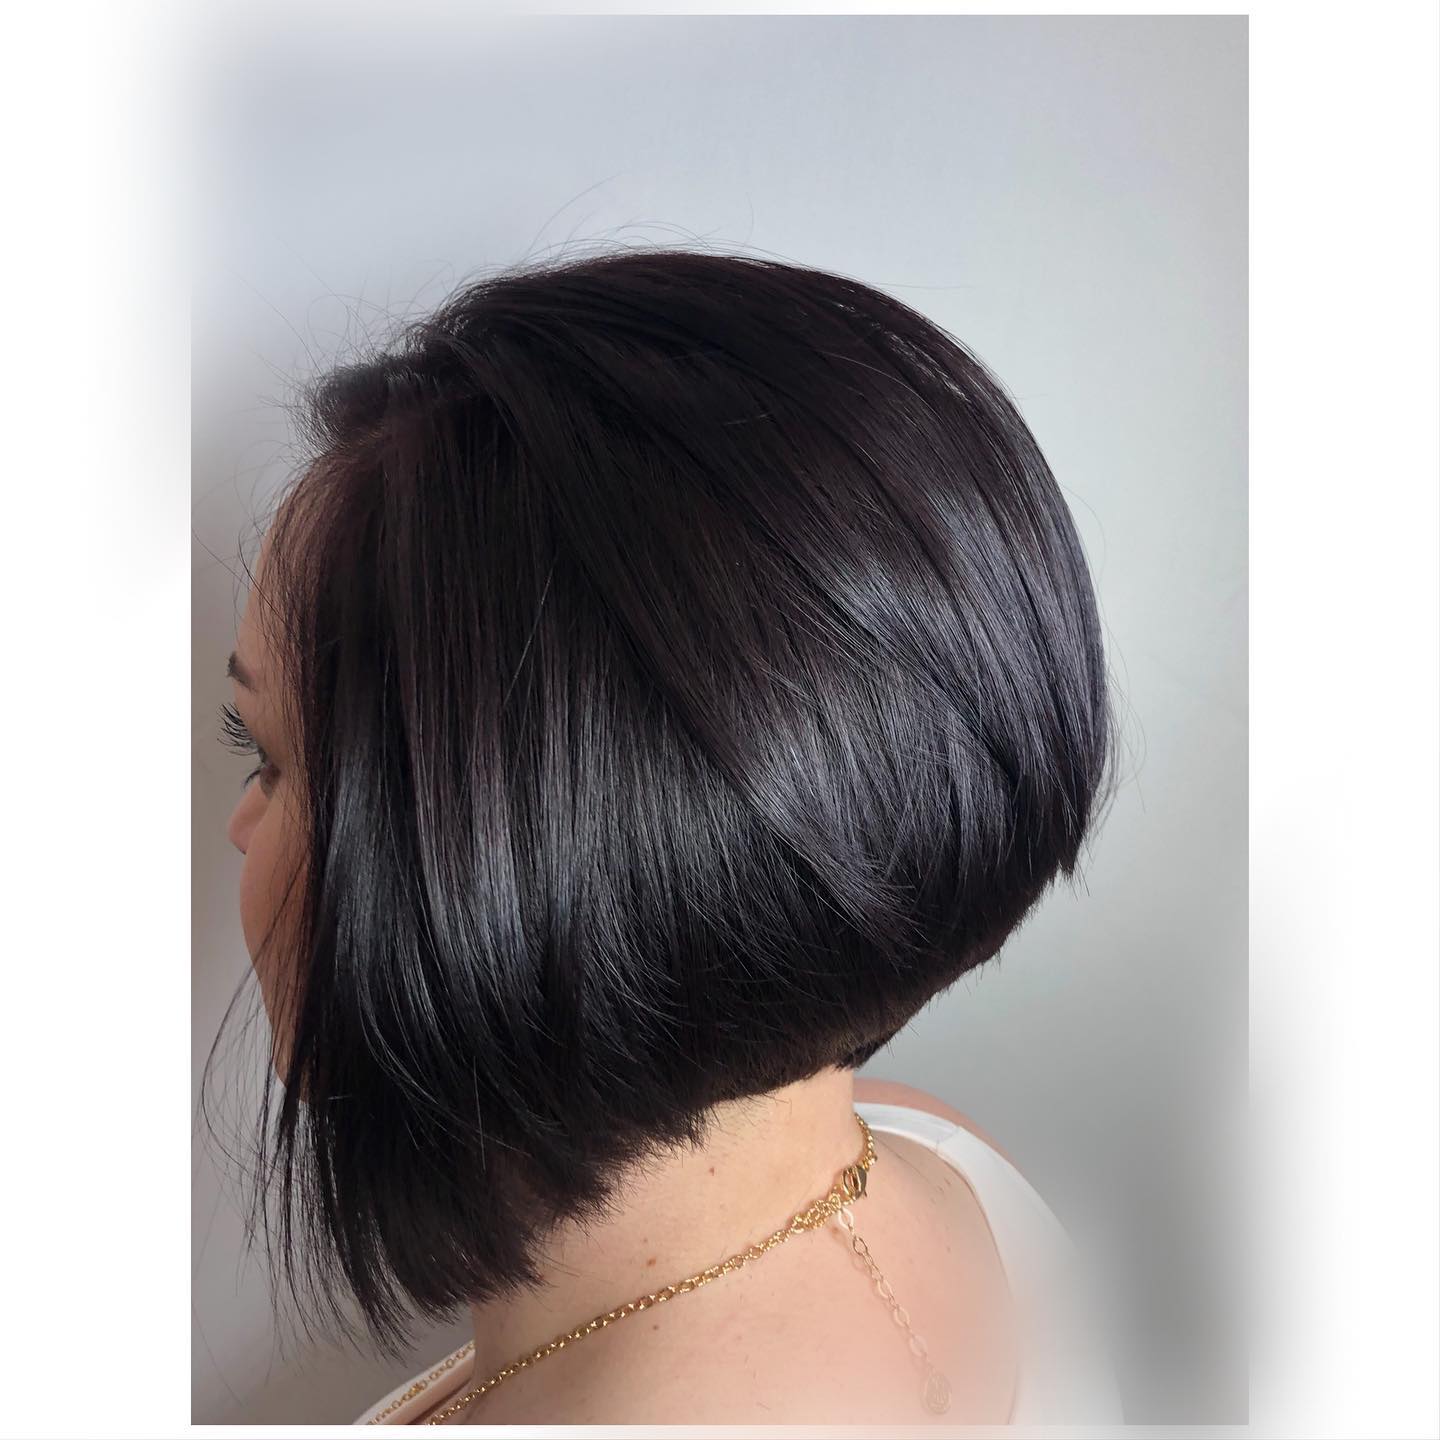 Stacked Bob 34 Long stacked bob | Medium length stacked bob | Pictures of stacked bob haircuts front and back Stacked Bob Hairstyles for Women